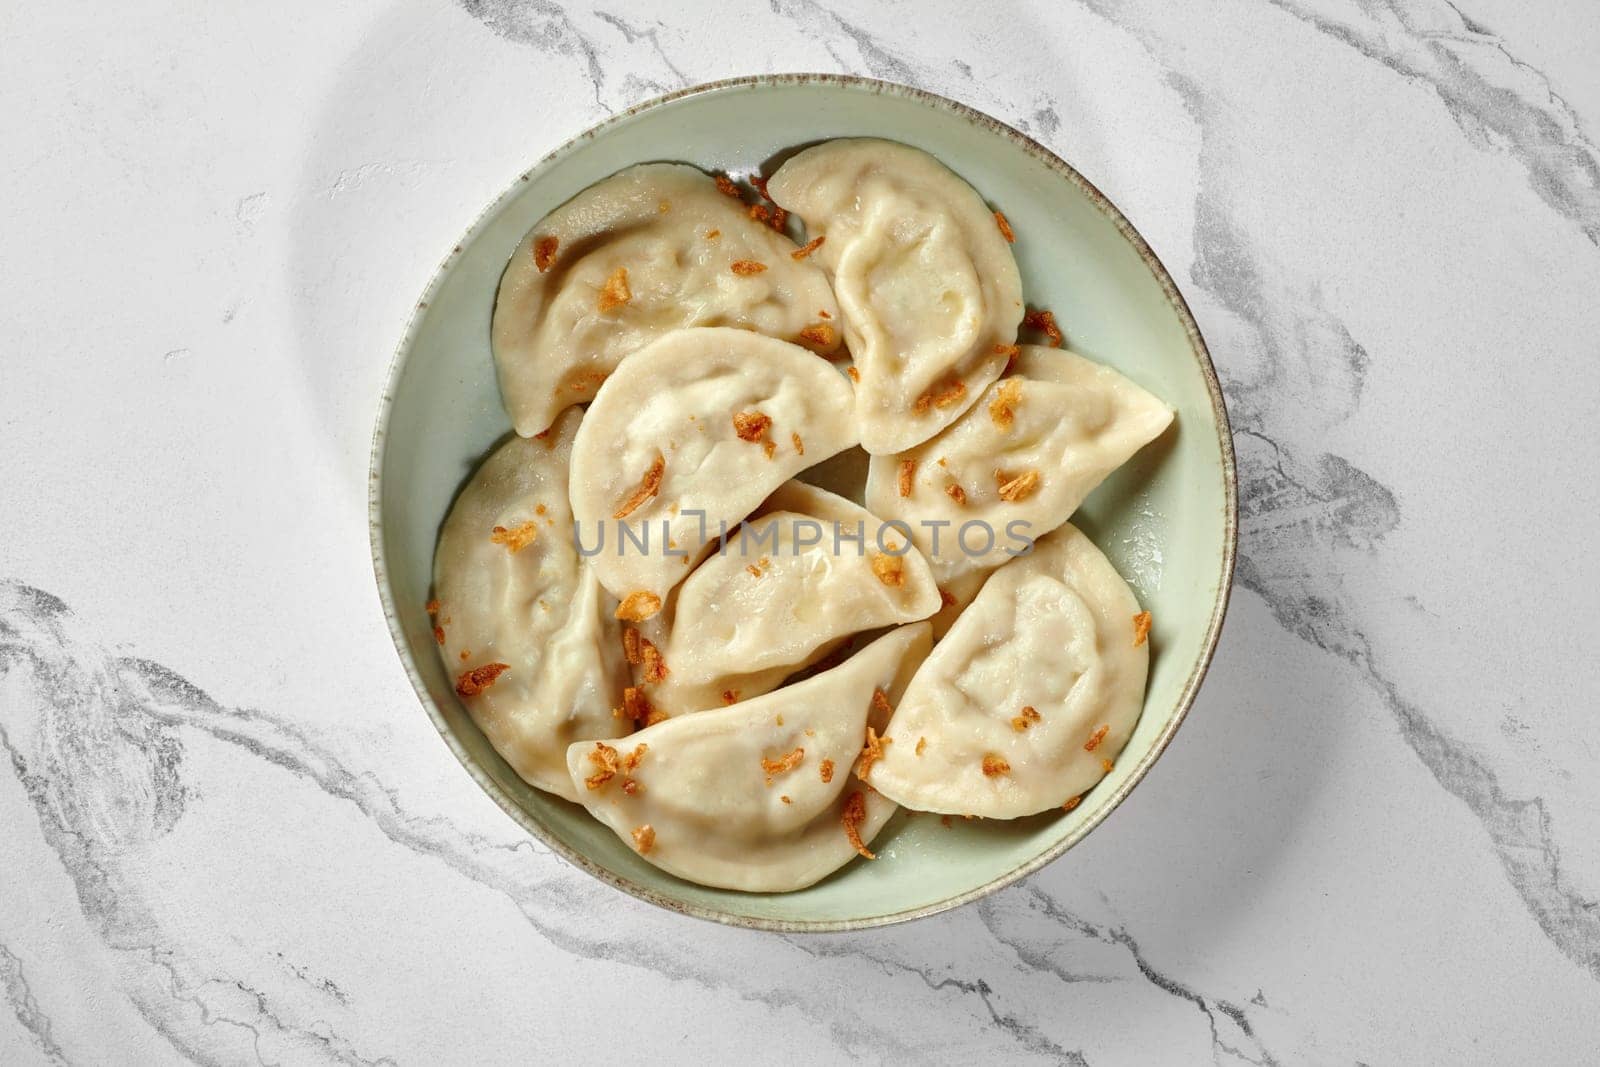 Traditional Ukrainian vareniki stuffed with ground meat garnished with crispy fried onions served in rustic ceramic bowl against marble background. Authentic cuisine